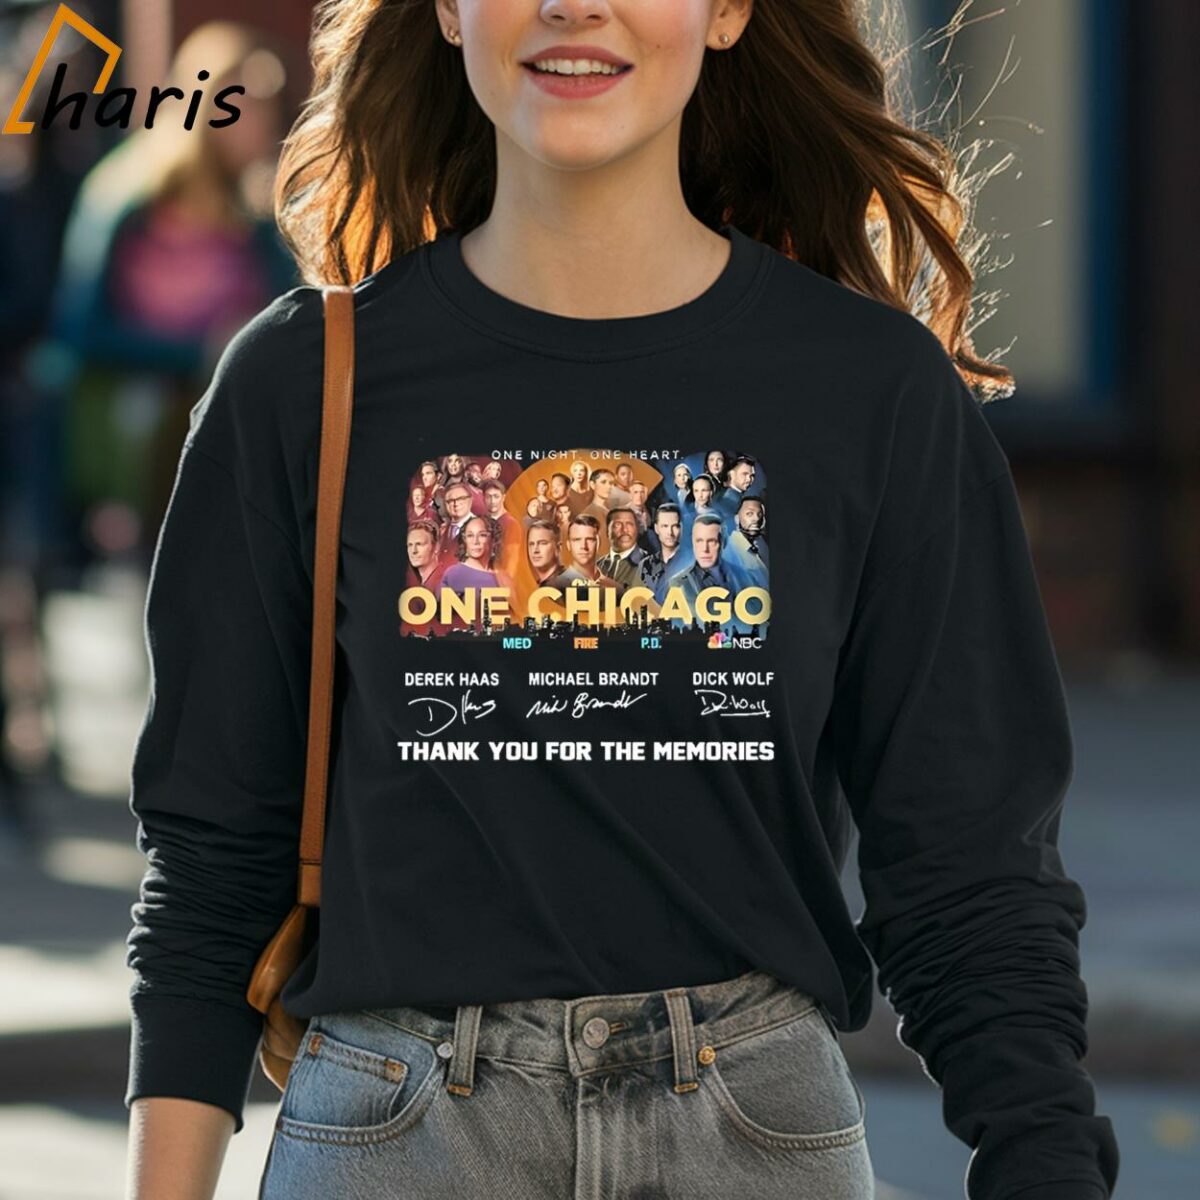 One Night One Heart One Chicago Members Thank You For The Memories T Shirt 4 long sleeve shirt